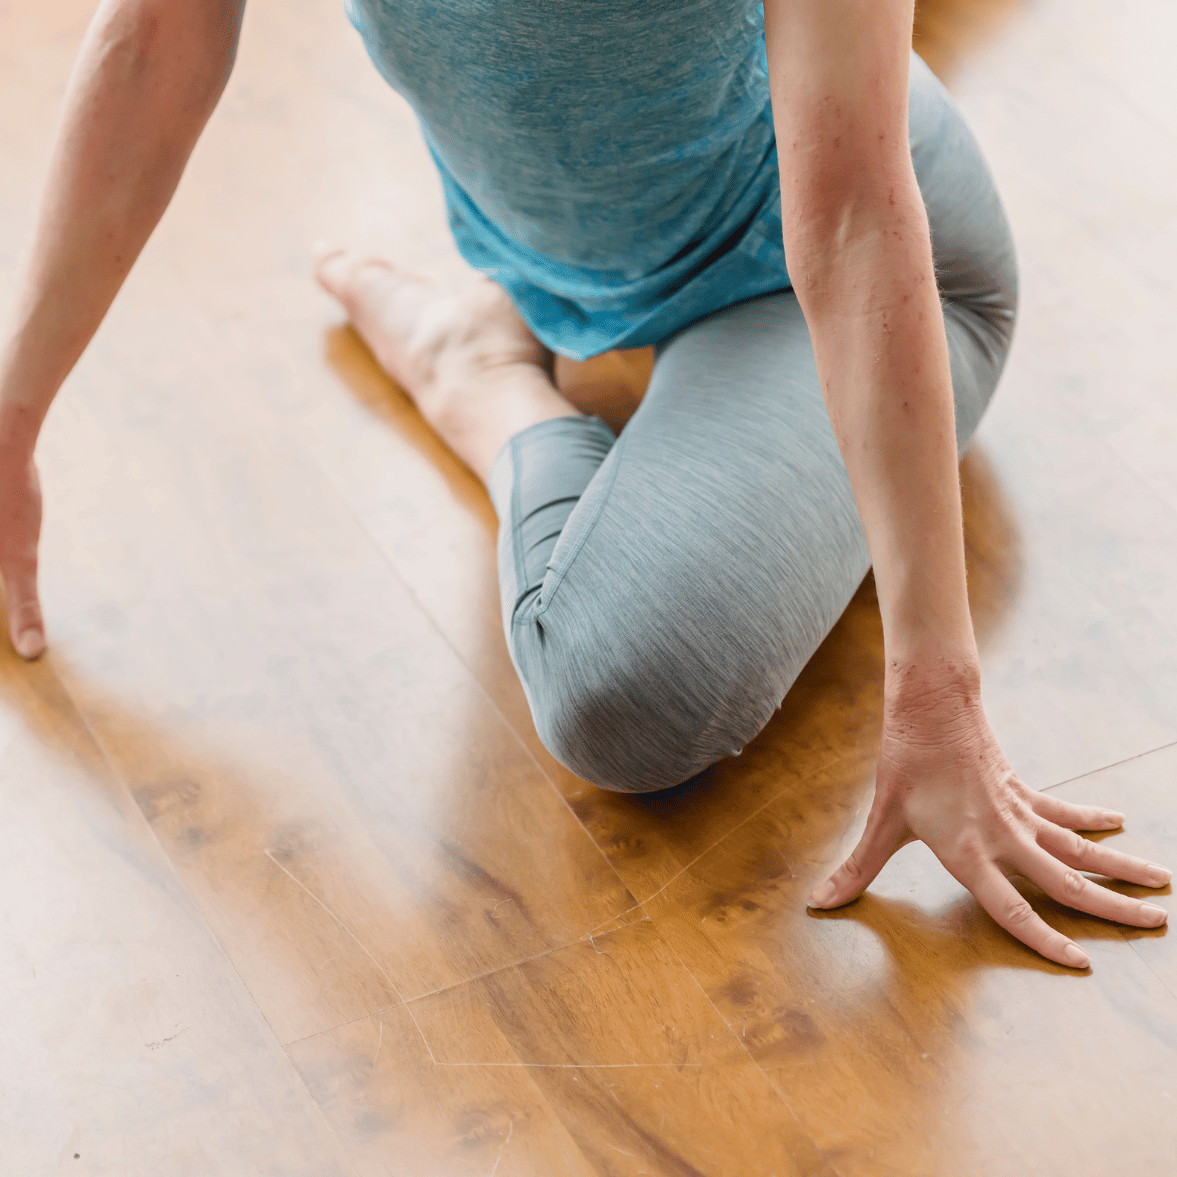 How to Be More Flexible: 30 Tips, Stretches, Exercises, and More